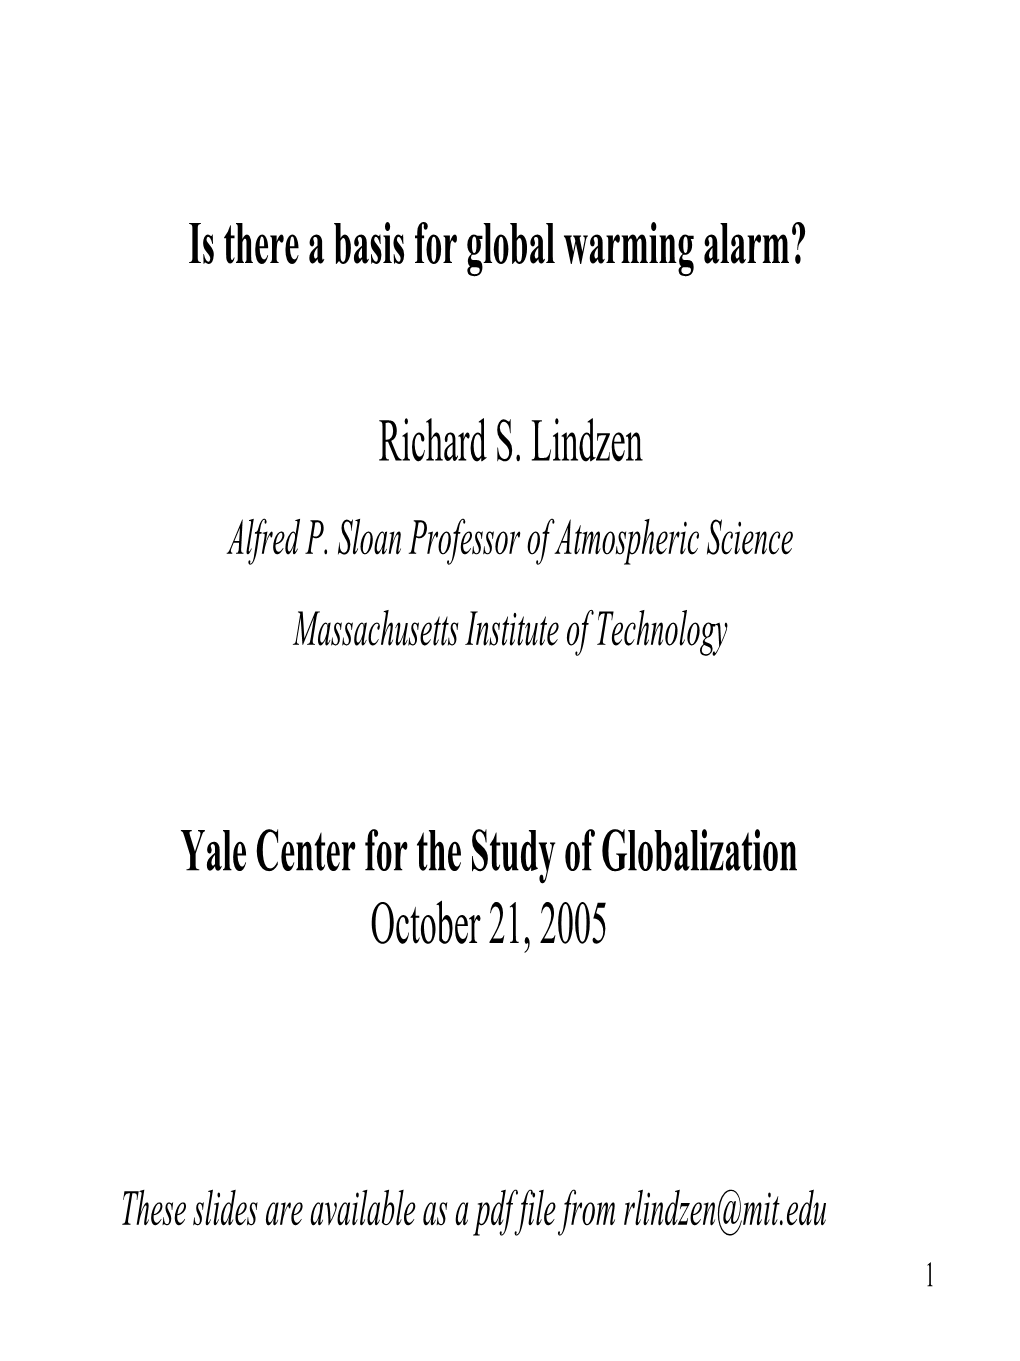 Is There a Basis for Global Warming Alarm? Richard S. Lindzen